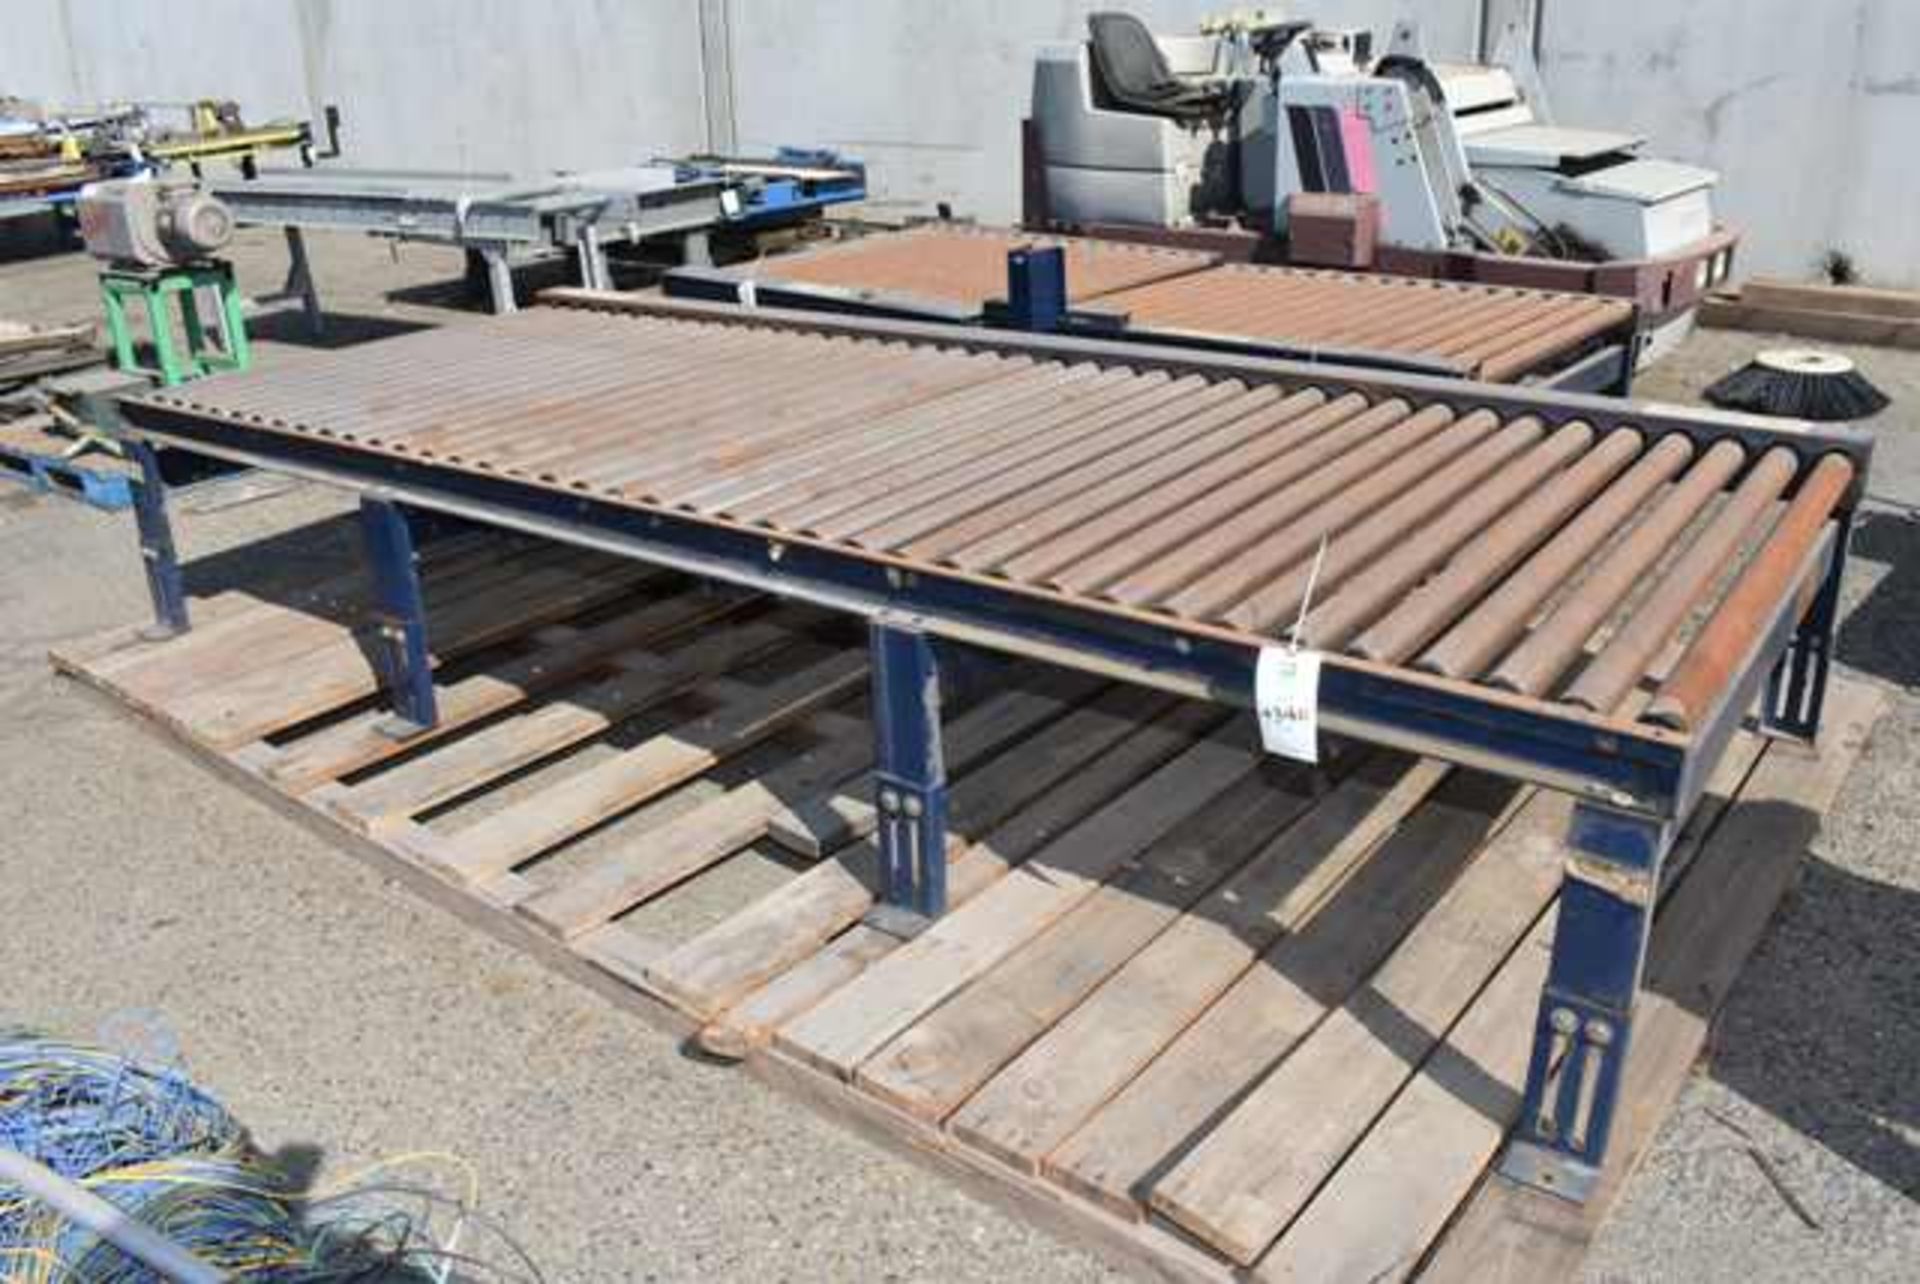 Lantech Motorized Roller Conveyor, 52" Rollers x 12' Length Section, RIGGING FEE: $25